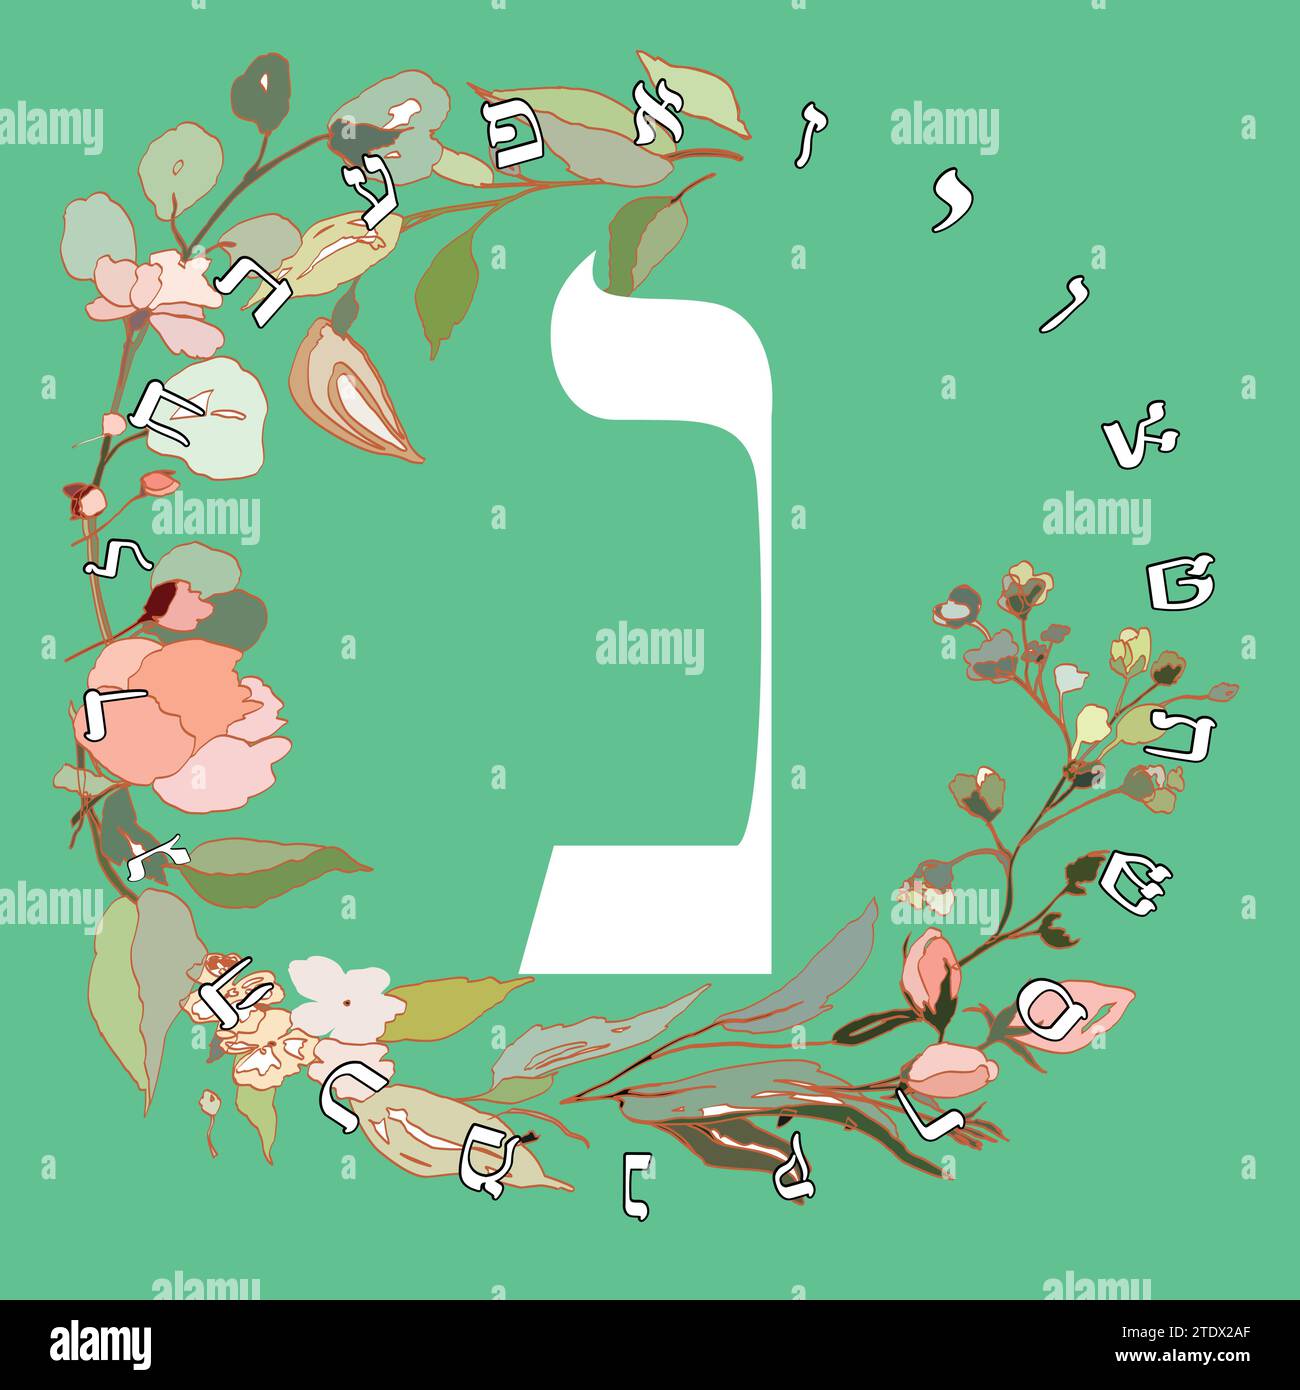 Vector illustration of the Hebrew alphabet with floral design. Hebrew letter called Nun white on green background. Stock Vector